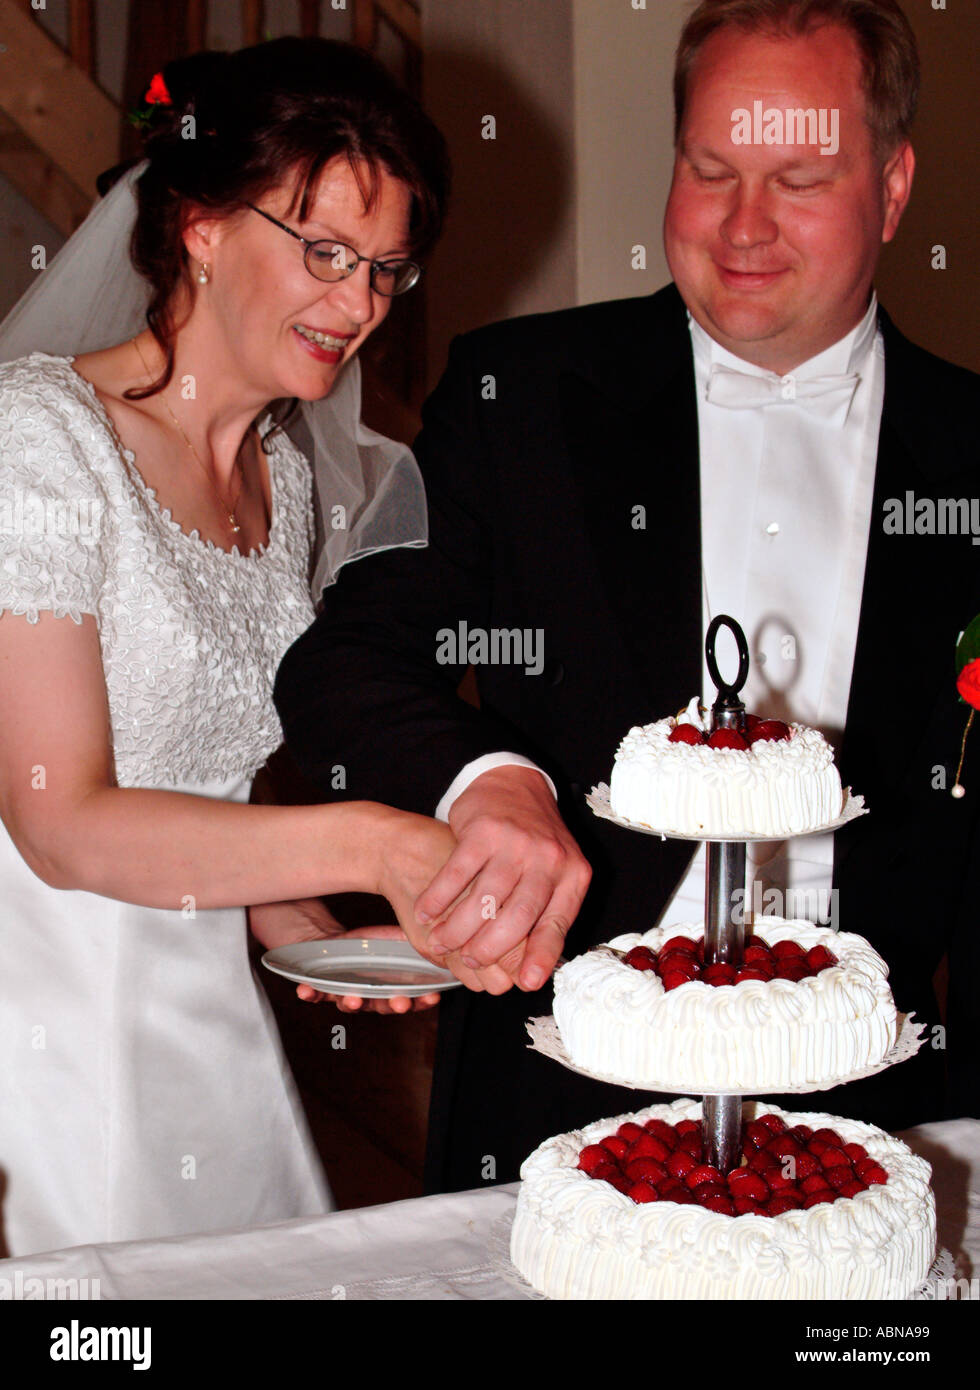 bridal pair cutting together the wedding cake MR Stock Photo